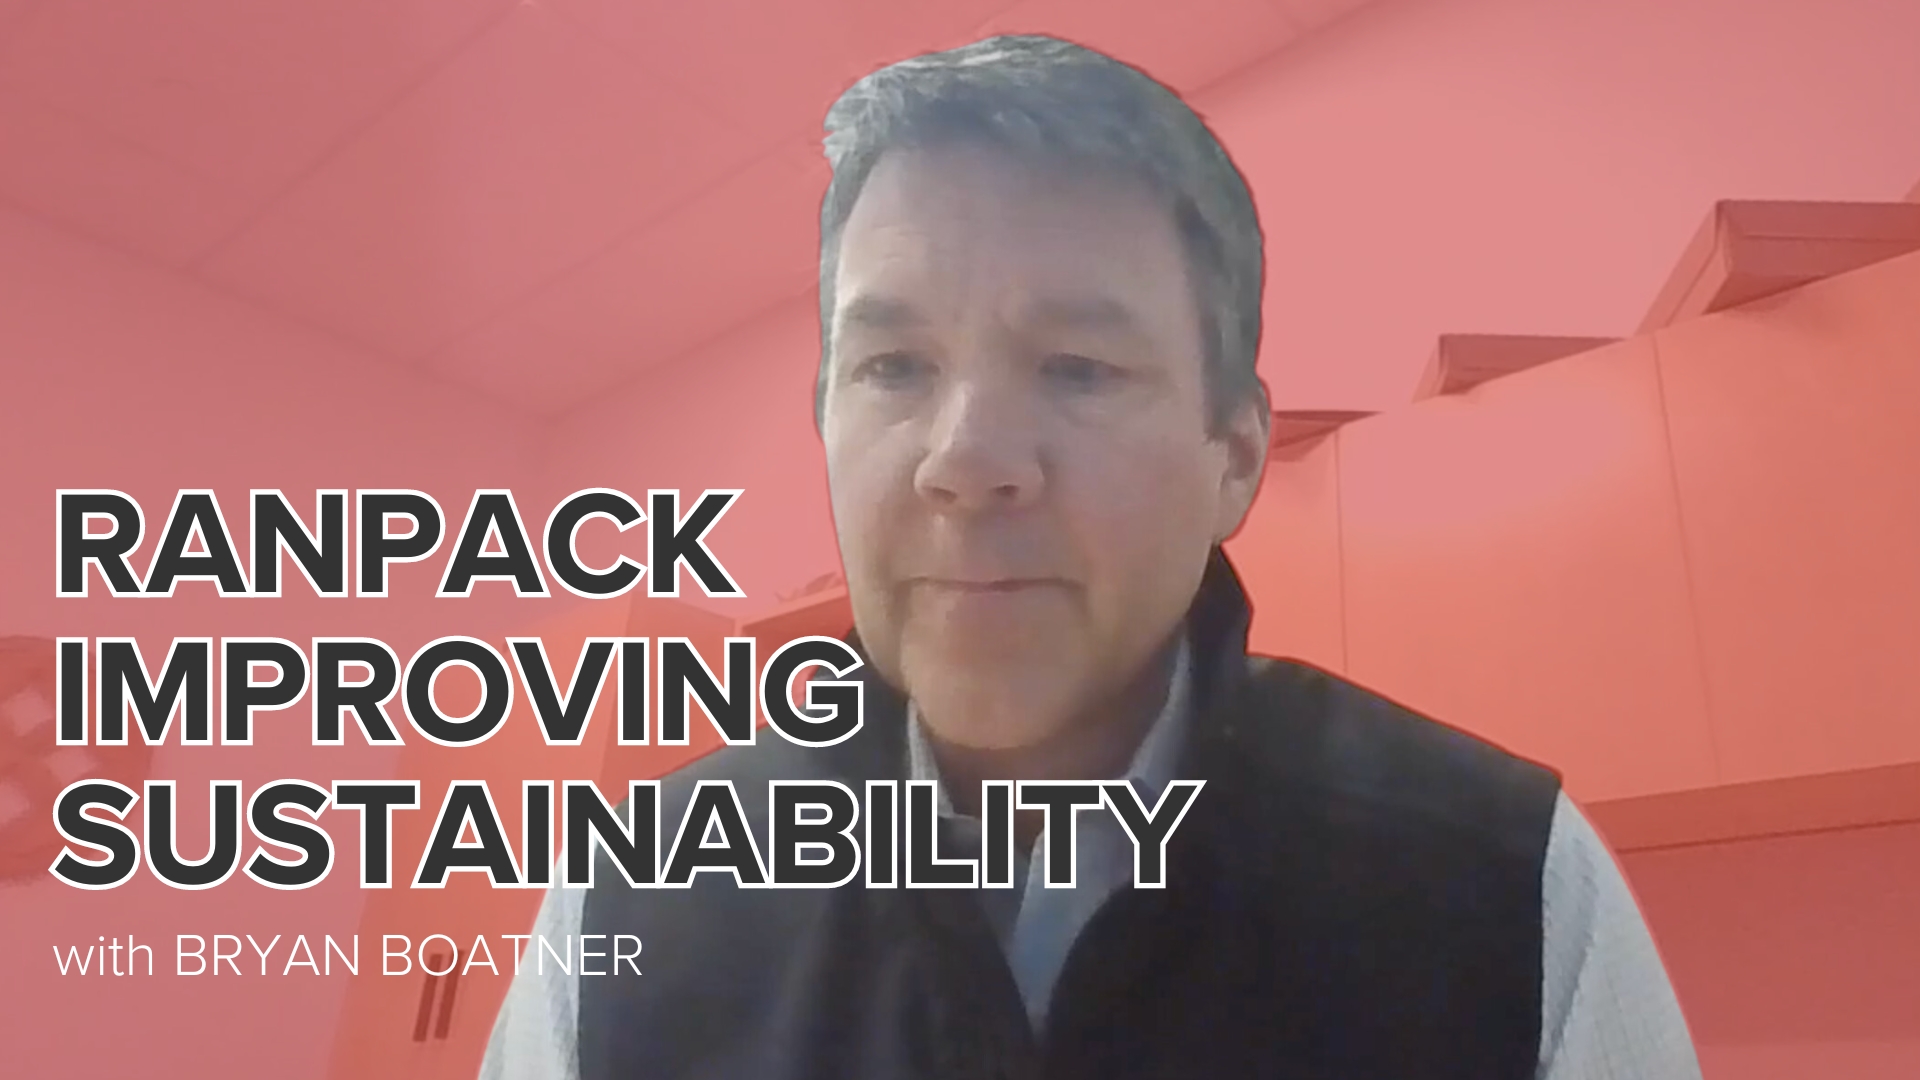 Video preview: Bryan Boatner discusses how Ranpak improves packaging sustainability